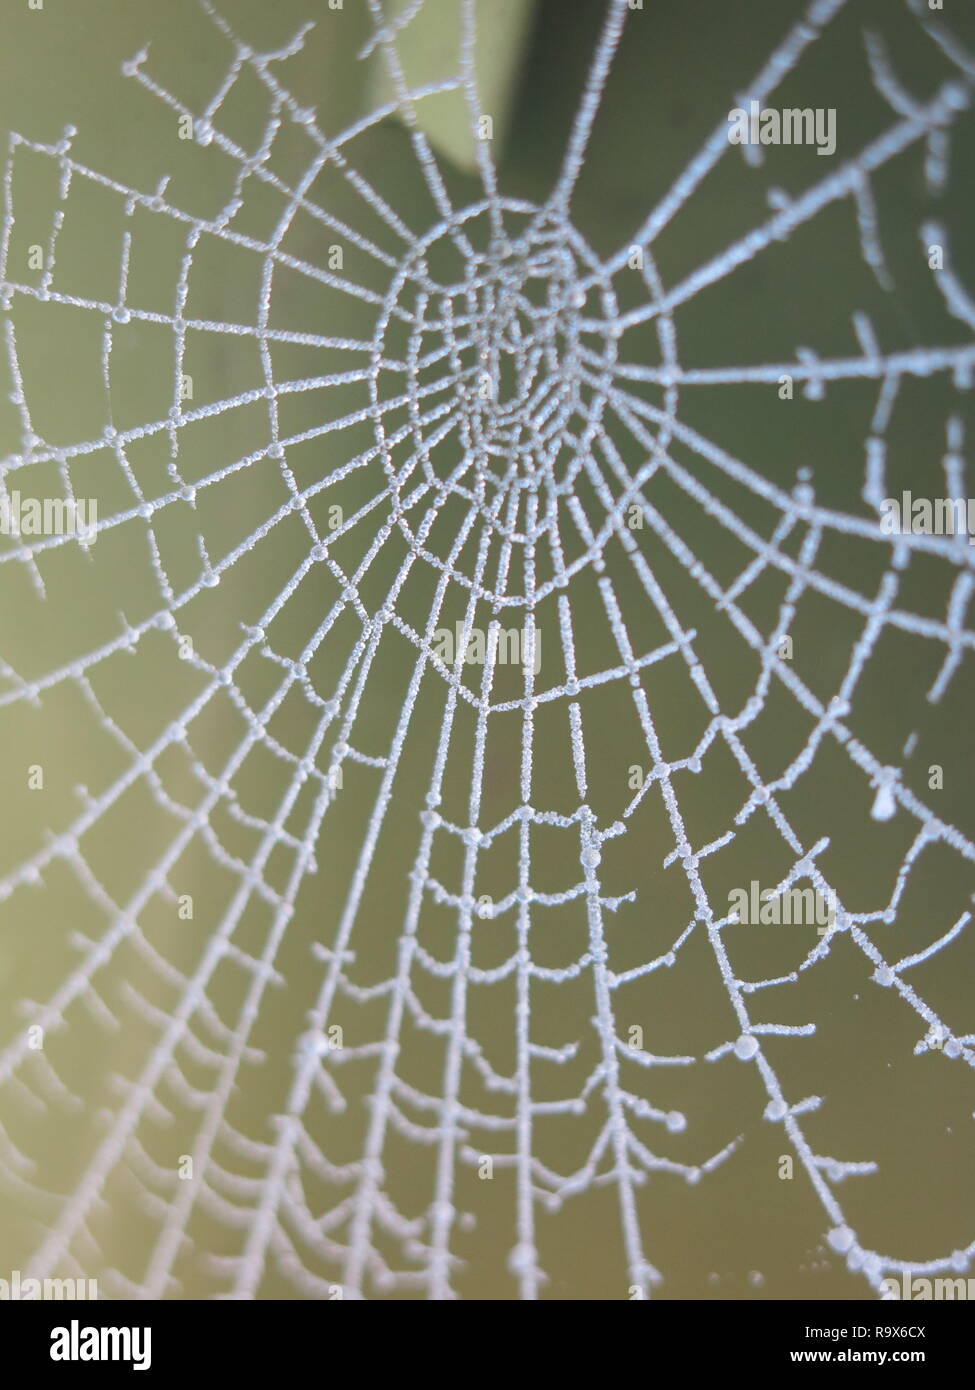 A very hard frost highlights the complex architecture and beauty of a spider's web, as well as the formation of ice crystals. Stock Photo